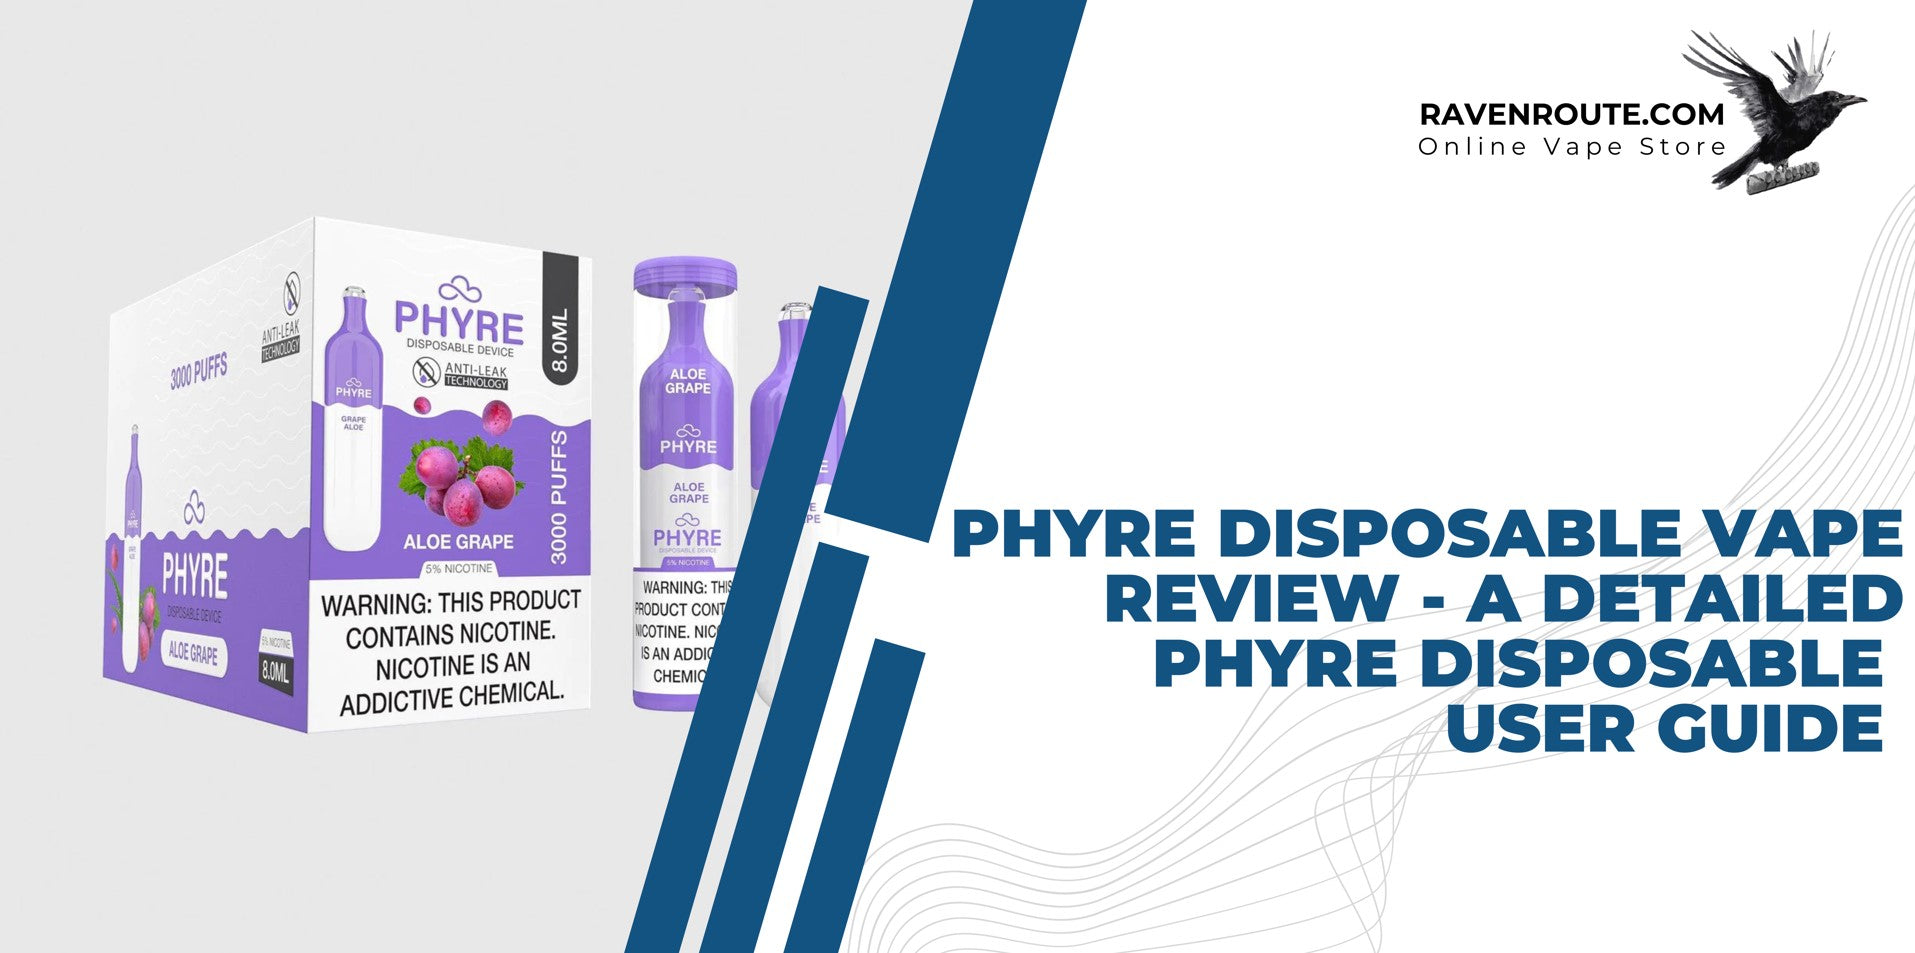 Phyre Disposable Vape Review - A Detailed Phyre Disposable User Guide